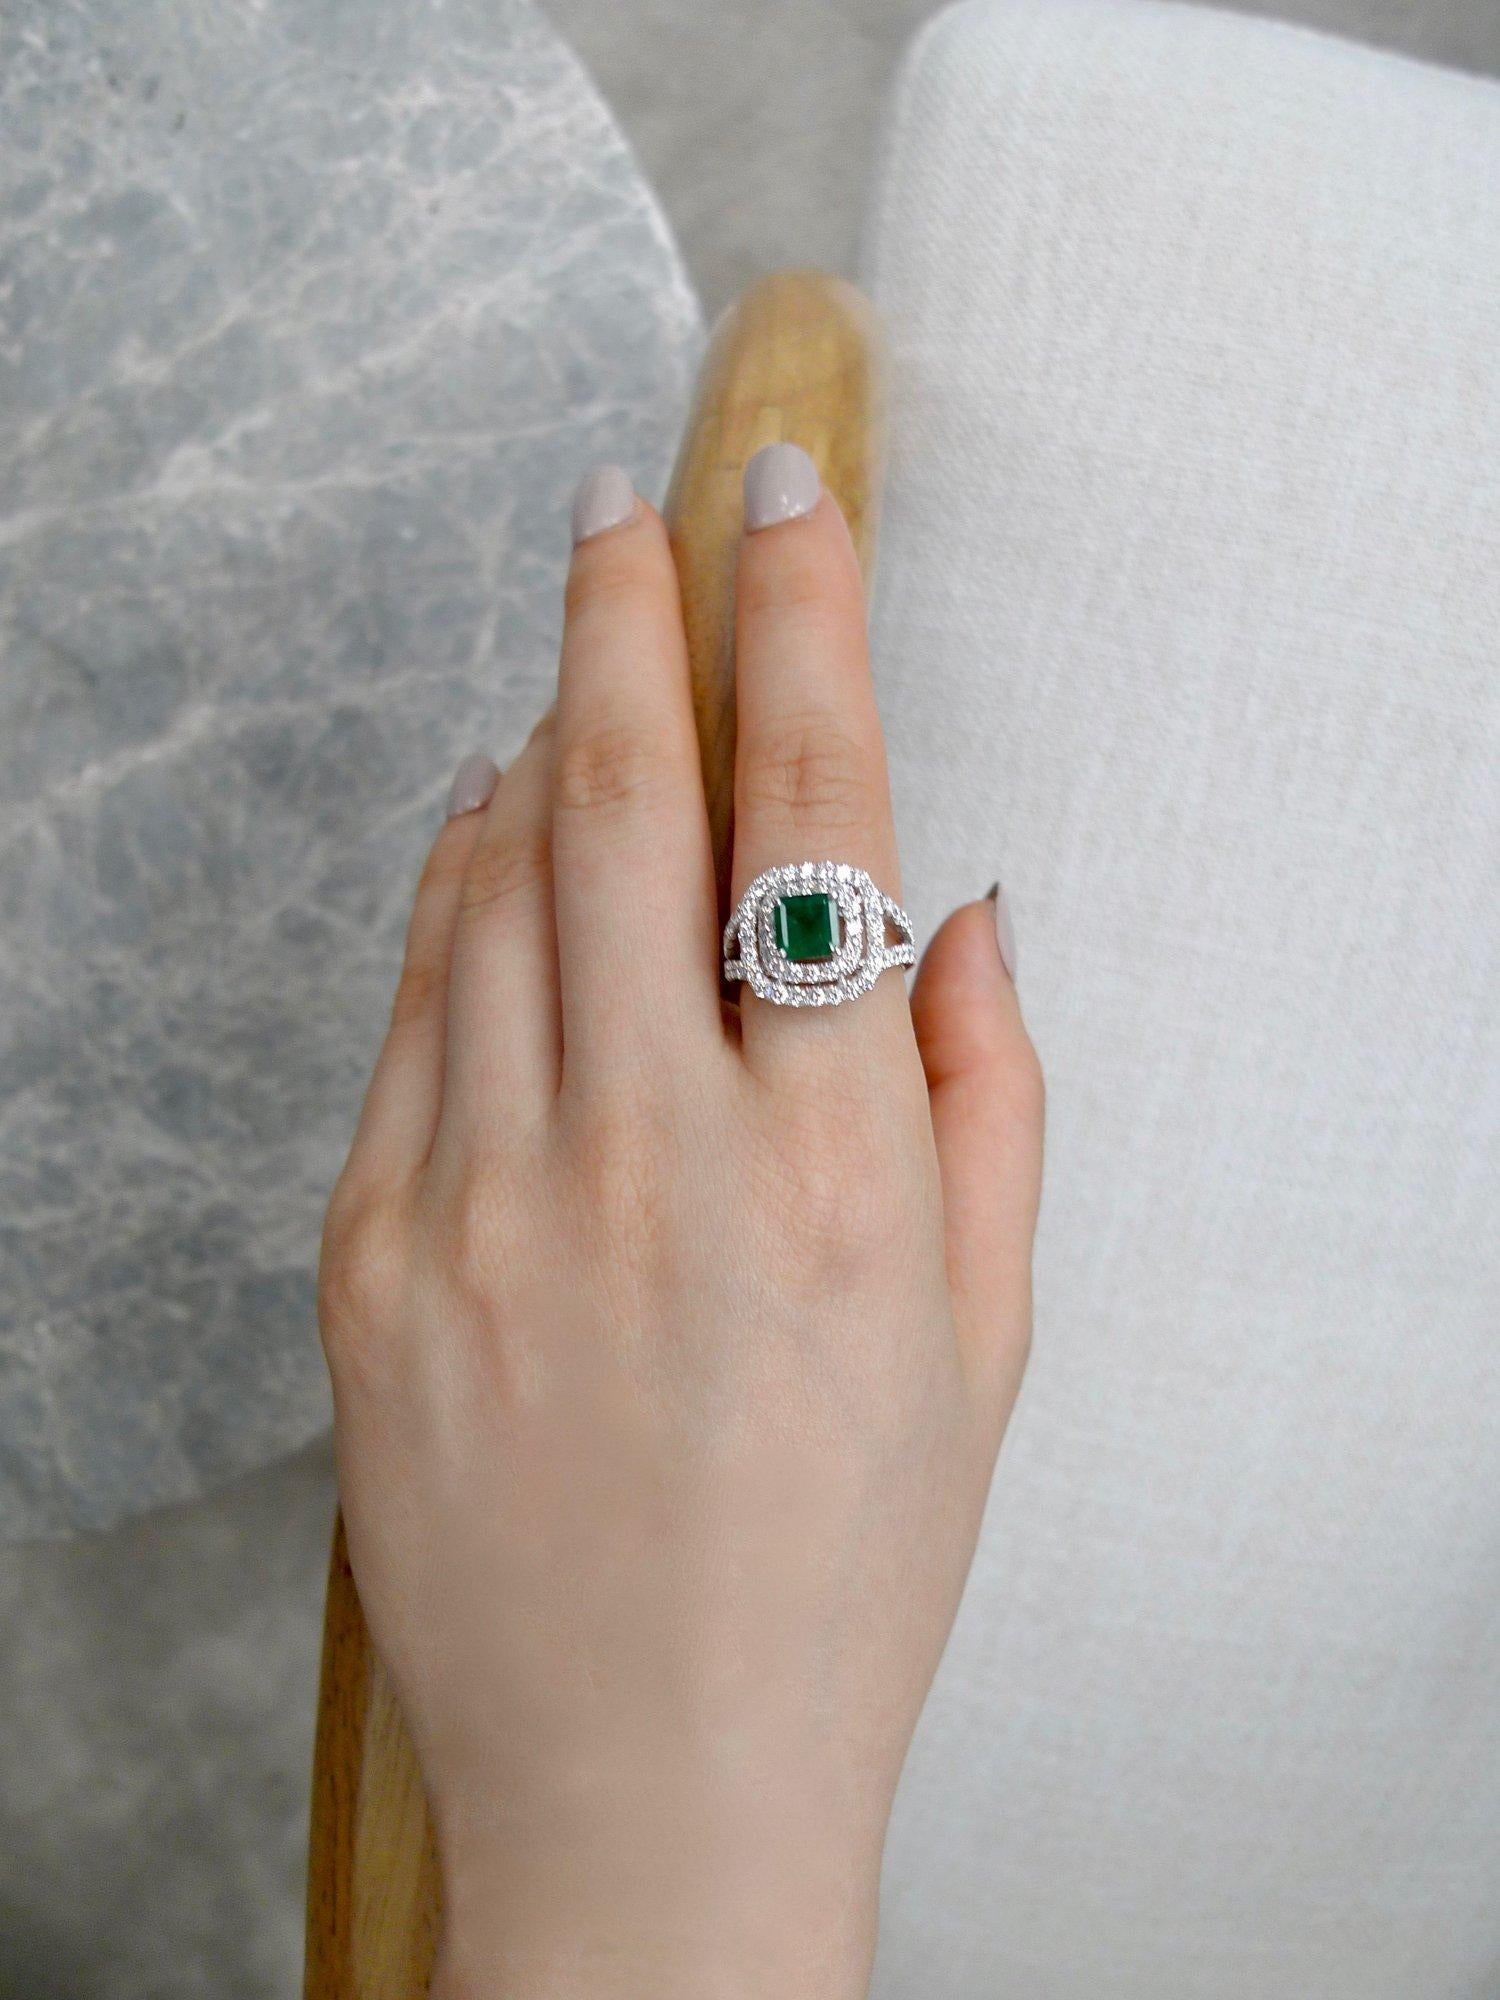 Item Features

• Gold KT: 18K White Gold
• Gemstone Cut: Emerald // Round Diamonds
• Number of Emeralds and Size : 1 Emerald 6x6MM in Size
• Number of Diamonds: 60 Round diamonds 1.30MM in Size
• Total Emerald CTW: 1.04ctw
• Total Diamond CTW: